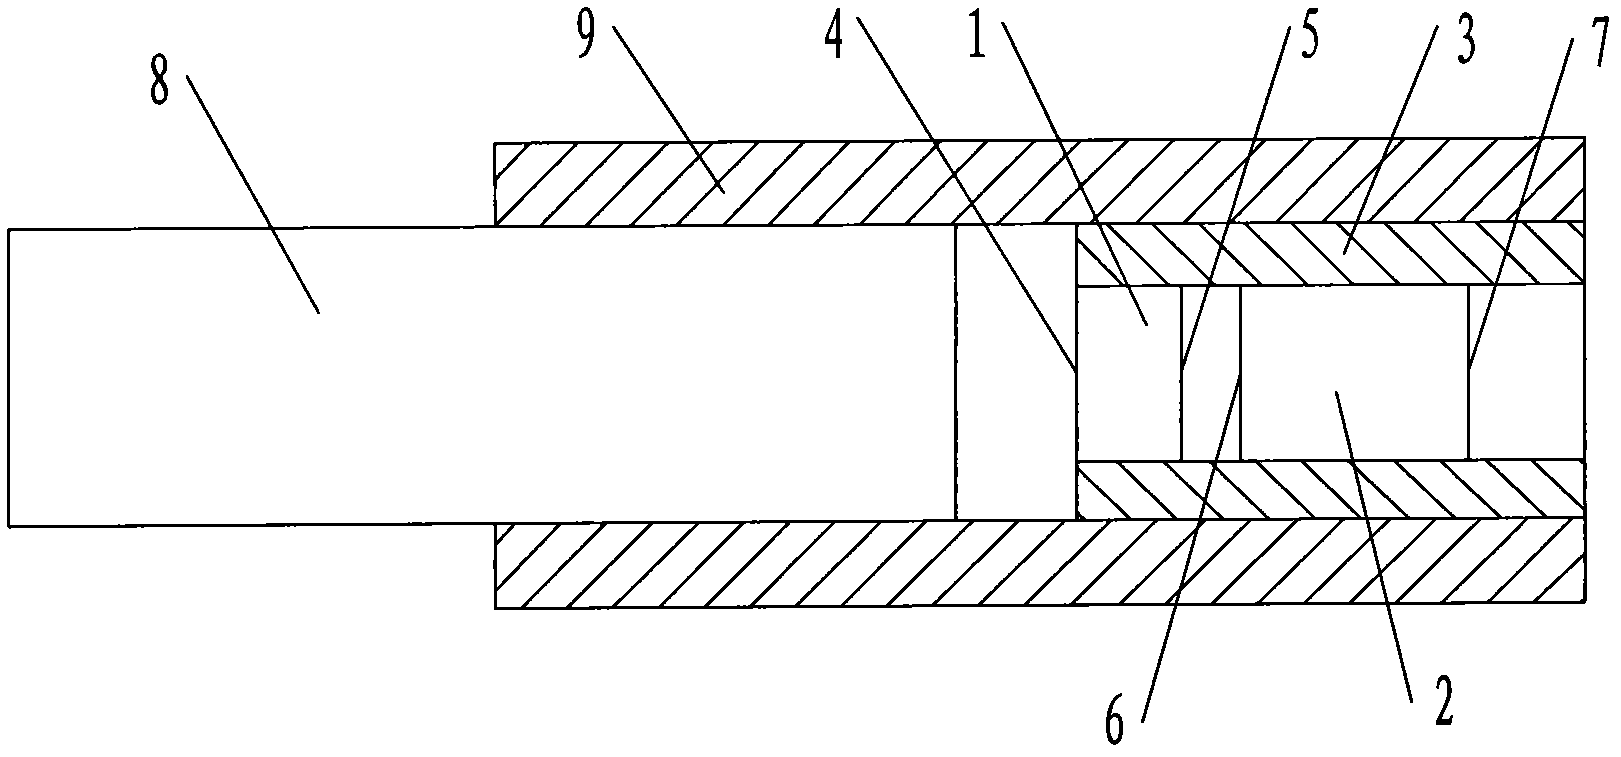 Optical fiber coupling semiconductor laser output light band indicating device